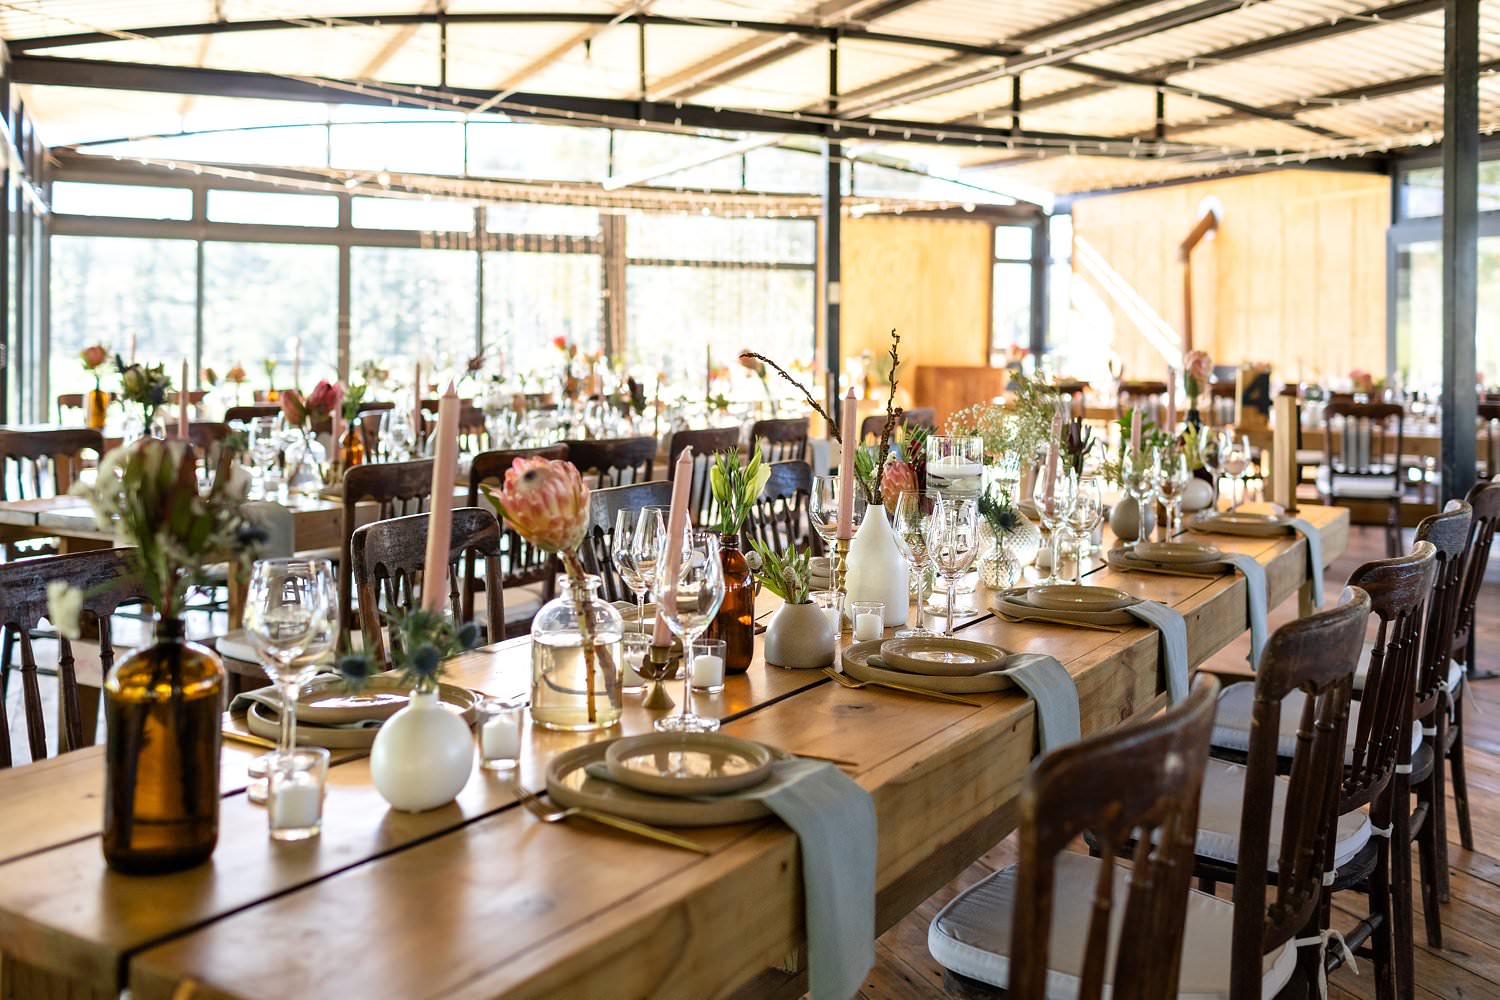 Rustic decor with indigenous South African flowers light up Cherry Glamping at their Elgin wedding venue